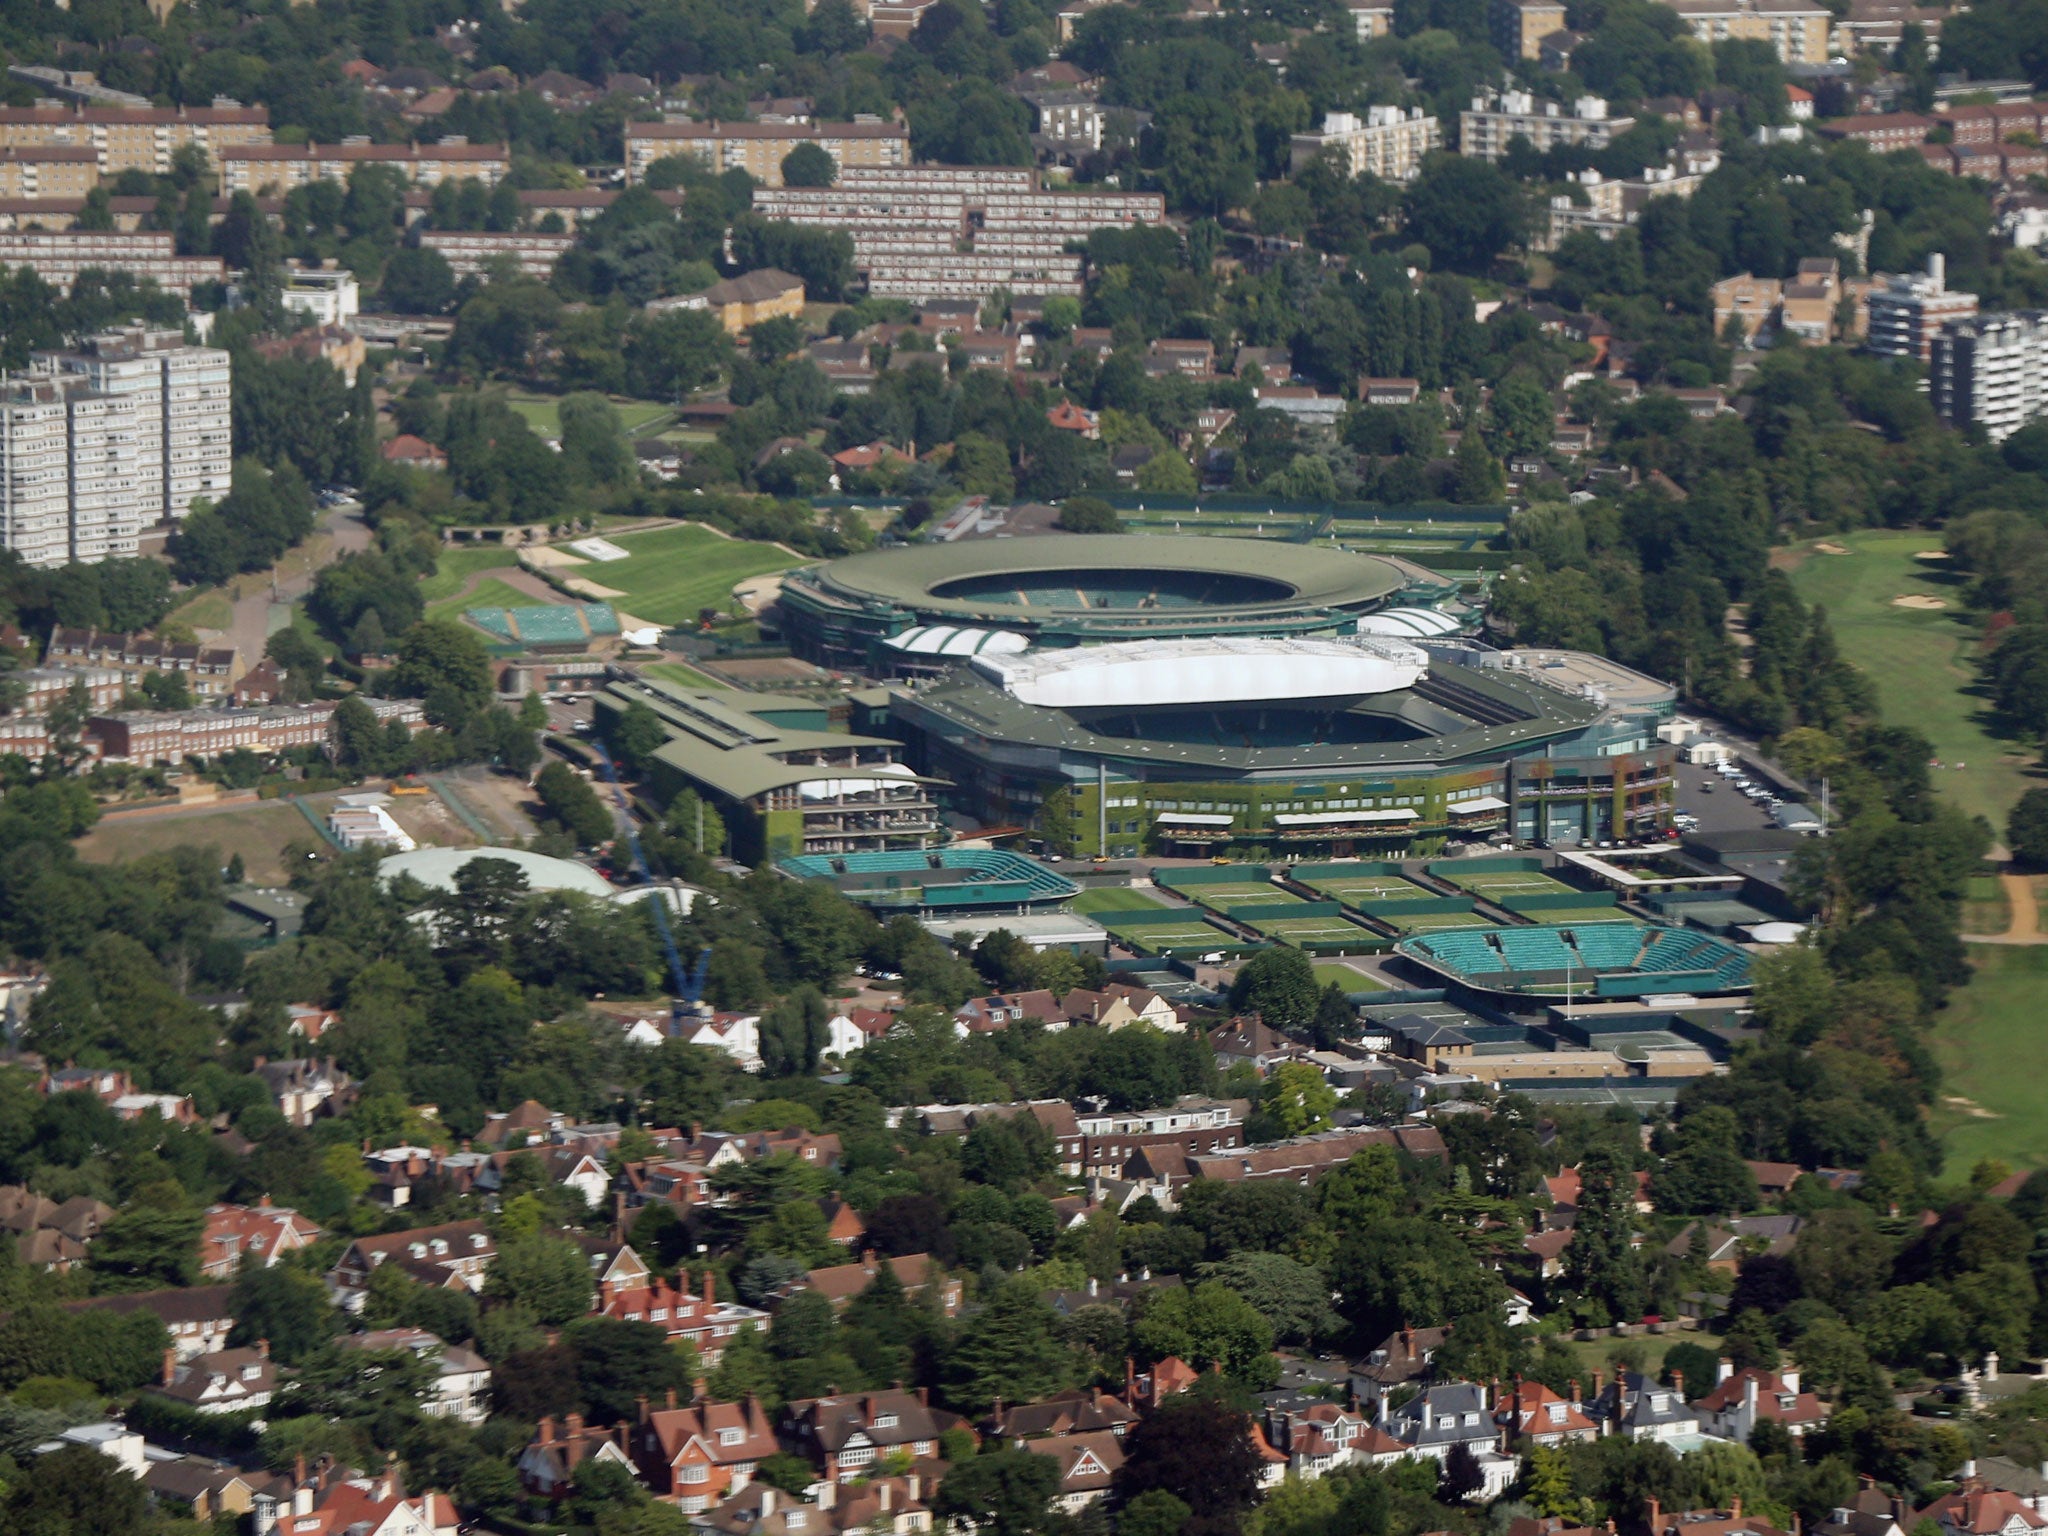 A view of the All England Lawn Tennis and Croquet Club (Wimbledon) from the Catalina, a 70 year old aircraft, during the first leg of its 'Circuit of Britain Flight', departing from the Imperial War Museum Duxford on August 21, 2013 in London, England. T